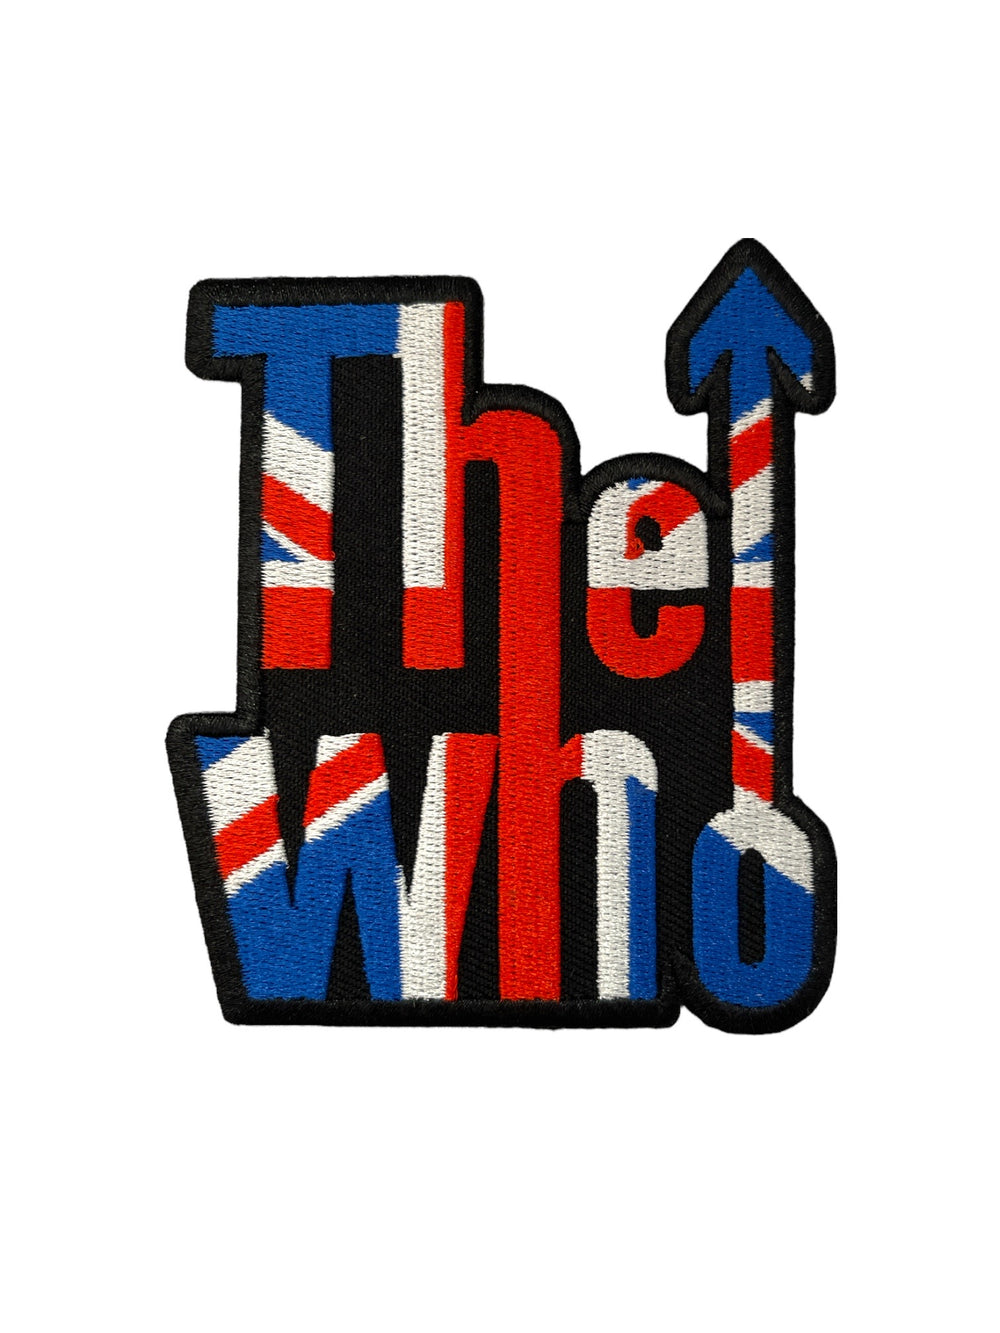 Who The - Union Jack Official Woven Patch Brand New